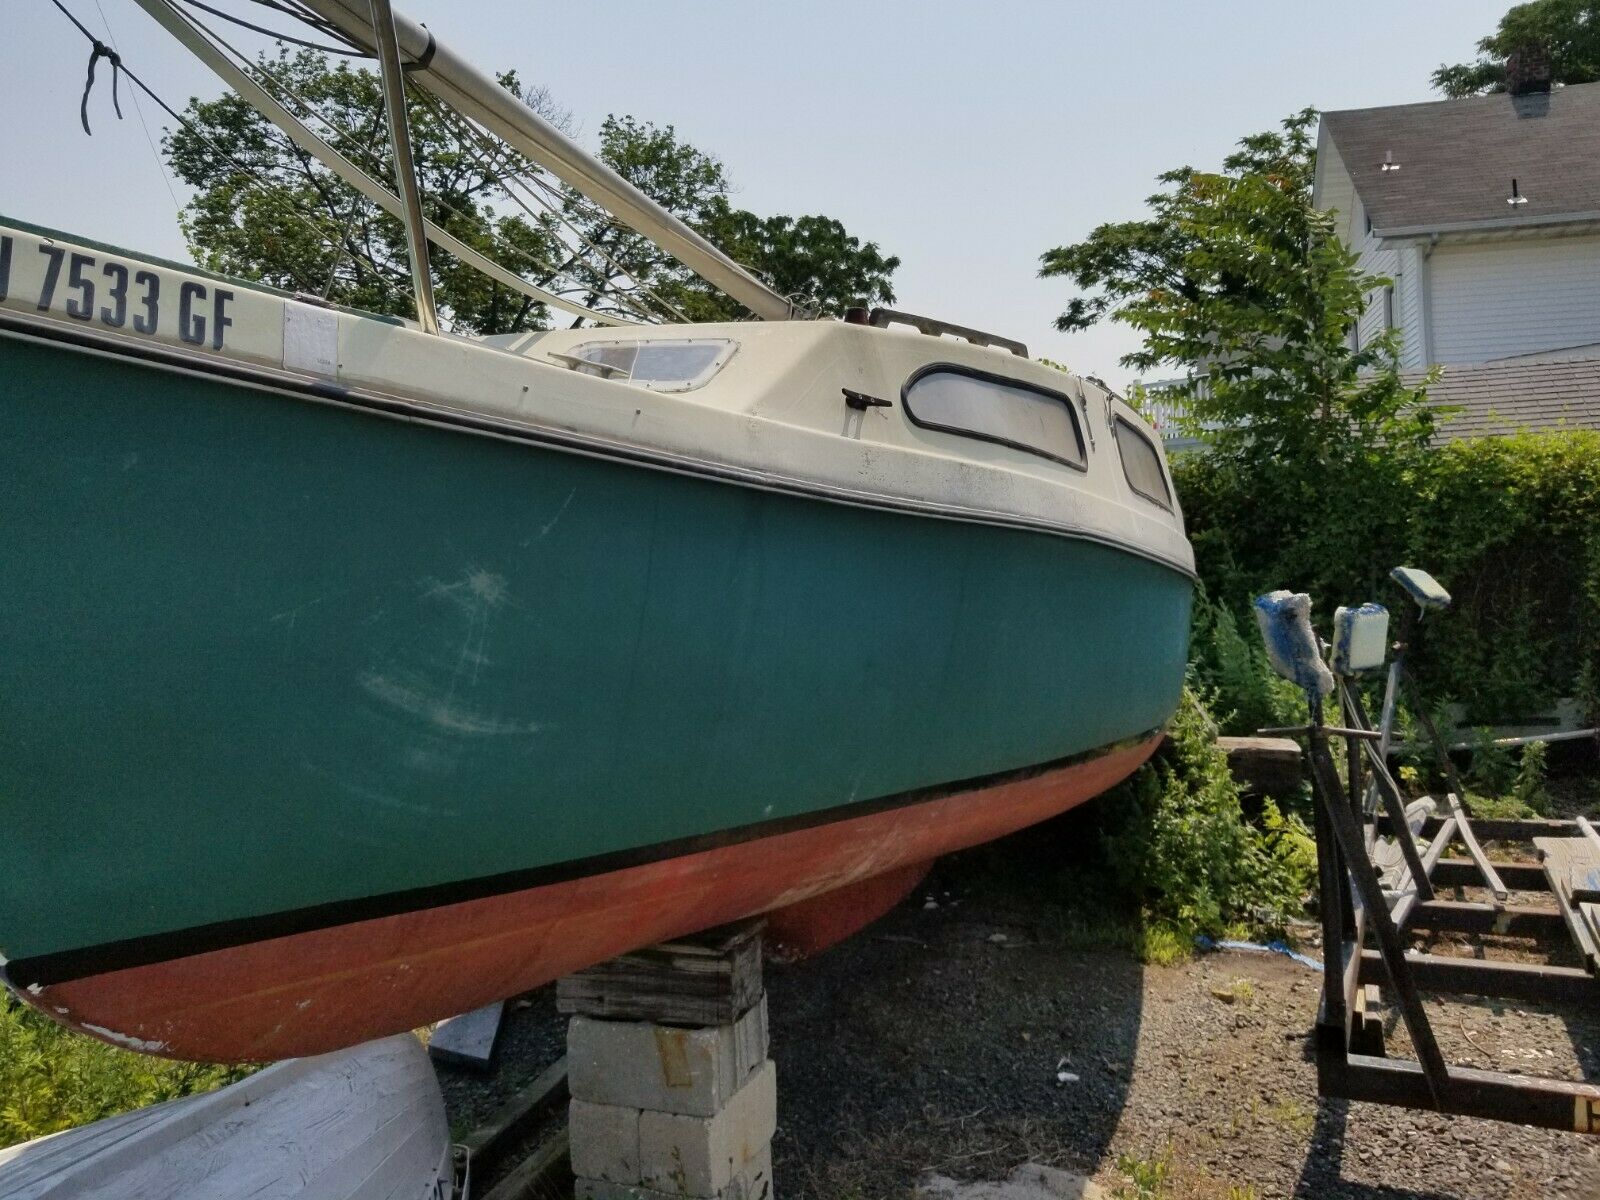 1977 Essex 26' Aft Cabin Sailboat - New Jersey